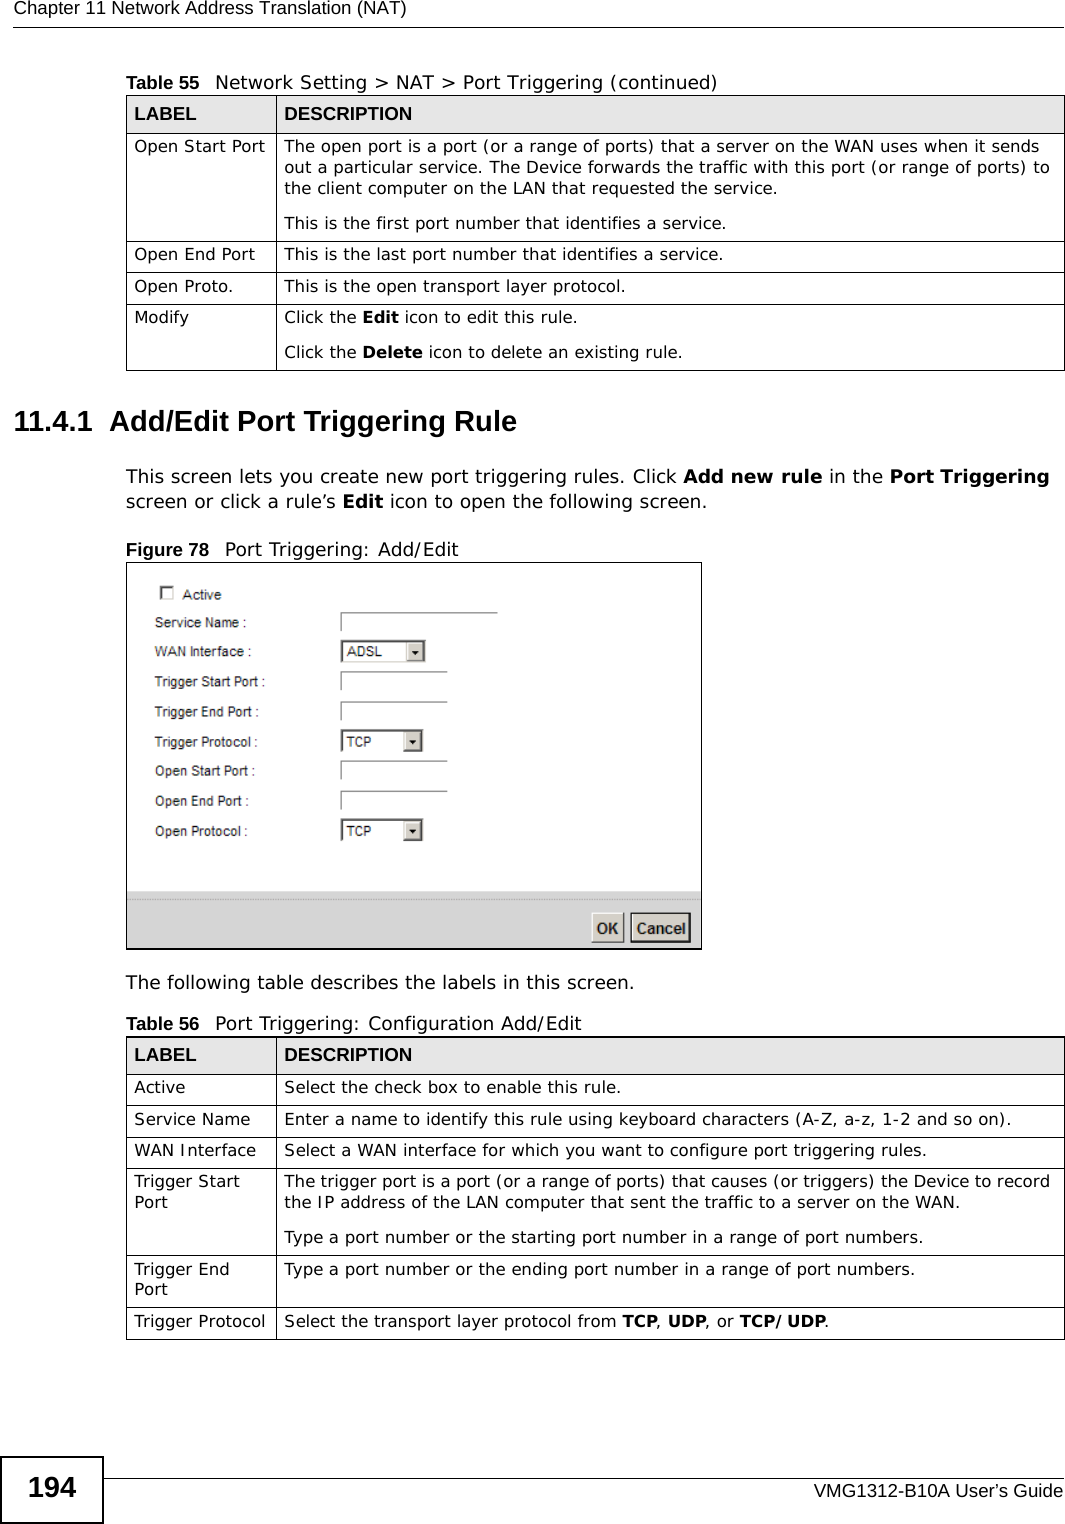 Chapter 11 Network Address Translation (NAT)VMG1312-B10A User’s Guide19411.4.1  Add/Edit Port Triggering Rule This screen lets you create new port triggering rules. Click Add new rule in the Port Triggering screen or click a rule’s Edit icon to open the following screen.Figure 78   Port Triggering: Add/Edit The following table describes the labels in this screen. Open Start Port The open port is a port (or a range of ports) that a server on the WAN uses when it sends out a particular service. The Device forwards the traffic with this port (or range of ports) to the client computer on the LAN that requested the service. This is the first port number that identifies a service.Open End Port This is the last port number that identifies a service.Open Proto. This is the open transport layer protocol.Modify Click the Edit icon to edit this rule.Click the Delete icon to delete an existing rule. Table 55   Network Setting &gt; NAT &gt; Port Triggering (continued)LABEL DESCRIPTIONTable 56   Port Triggering: Configuration Add/EditLABEL DESCRIPTIONActive Select the check box to enable this rule.Service Name Enter a name to identify this rule using keyboard characters (A-Z, a-z, 1-2 and so on). WAN Interface Select a WAN interface for which you want to configure port triggering rules.Trigger Start Port The trigger port is a port (or a range of ports) that causes (or triggers) the Device to record the IP address of the LAN computer that sent the traffic to a server on the WAN.Type a port number or the starting port number in a range of port numbers.Trigger End Port  Type a port number or the ending port number in a range of port numbers.Trigger Protocol Select the transport layer protocol from TCP, UDP, or TCP/UDP.